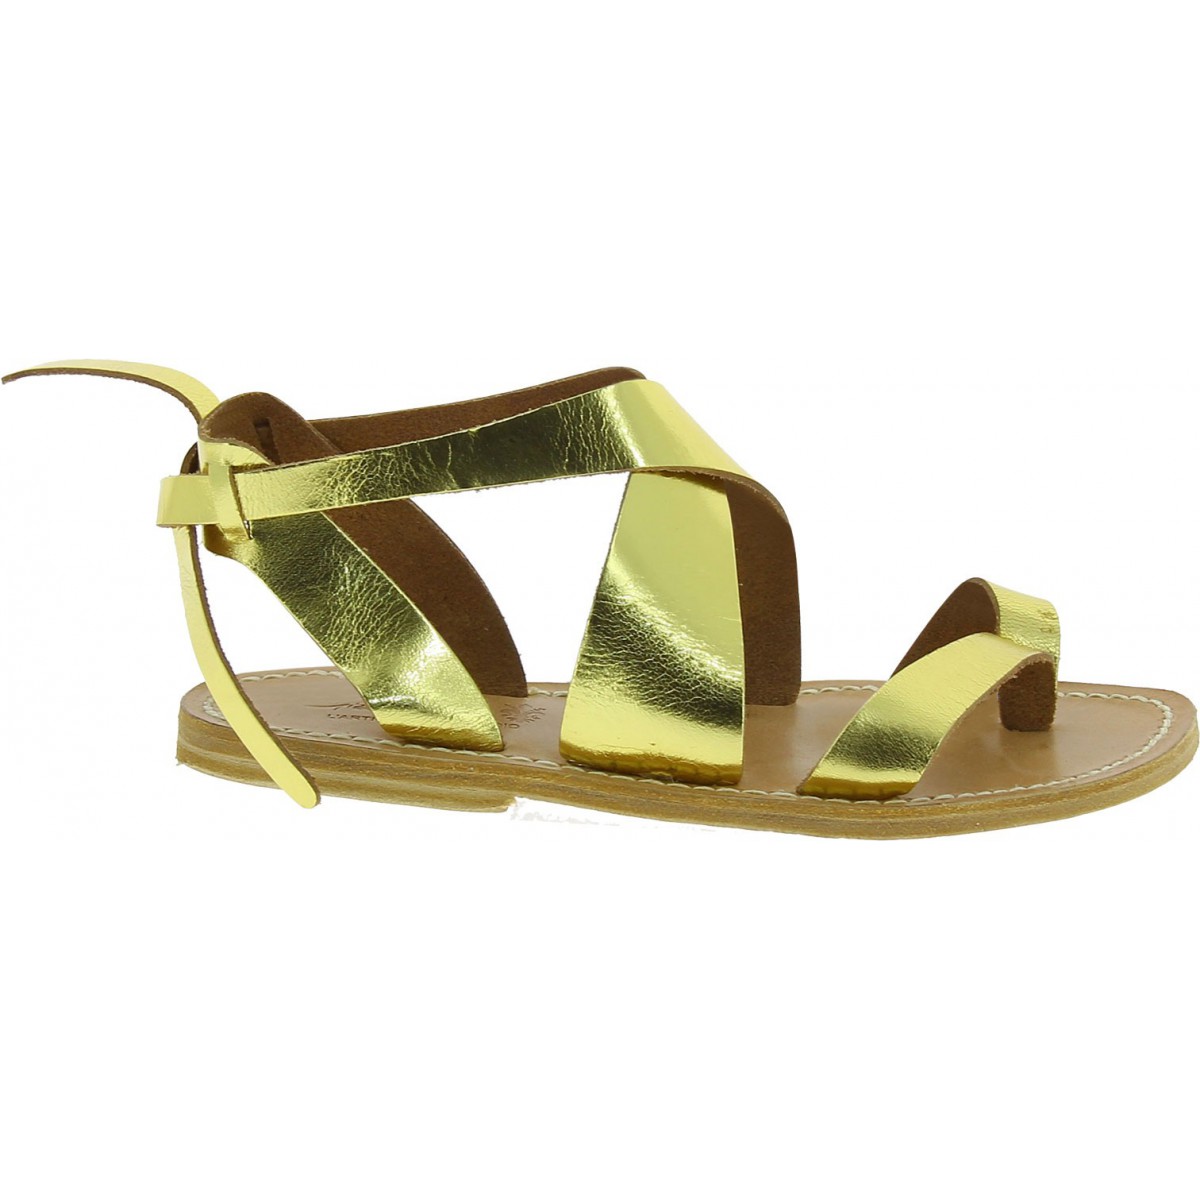 Women's sandals in metallic gold leather handmade in Italy | The ...